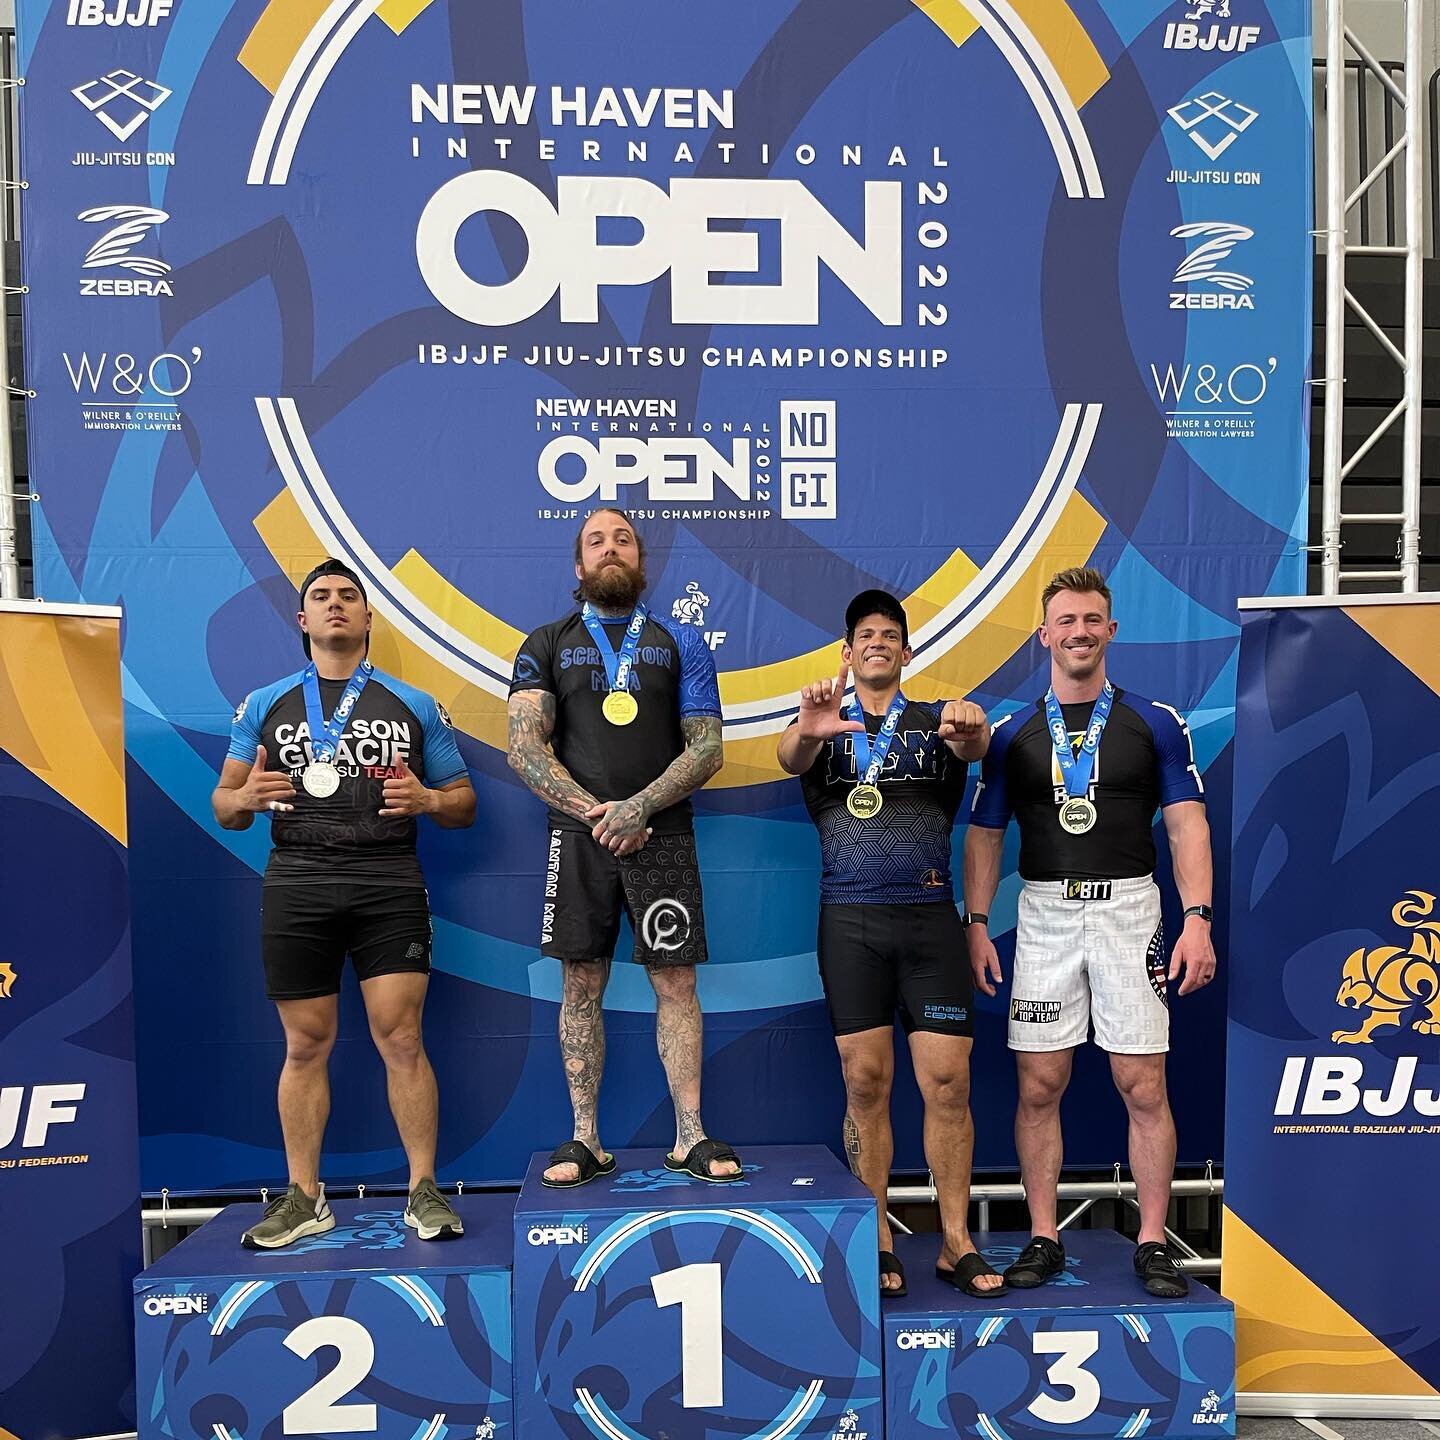 A lot of people would&rsquo;ve quit after taking a flying headbutt in a jiu jitsu match and having their lip split open. Not Simon, Simon is a fucking wolf. Proud of you brother 🐺 #ibjjf